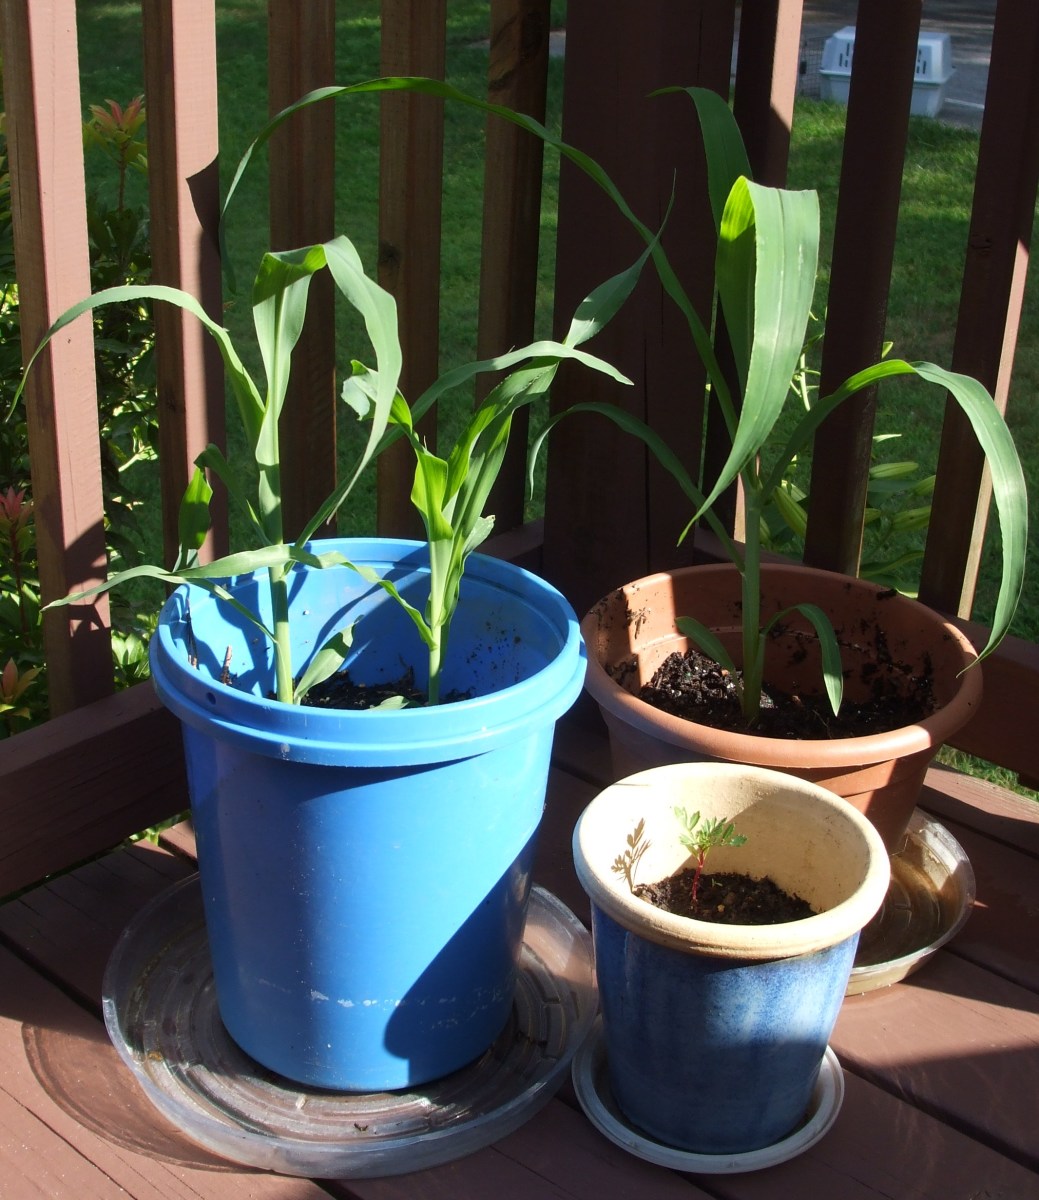 Some of my corn seeds are in containers; some are in the ground.  The container plants are doing markedly better.  Next year, better soil amending in the garden!